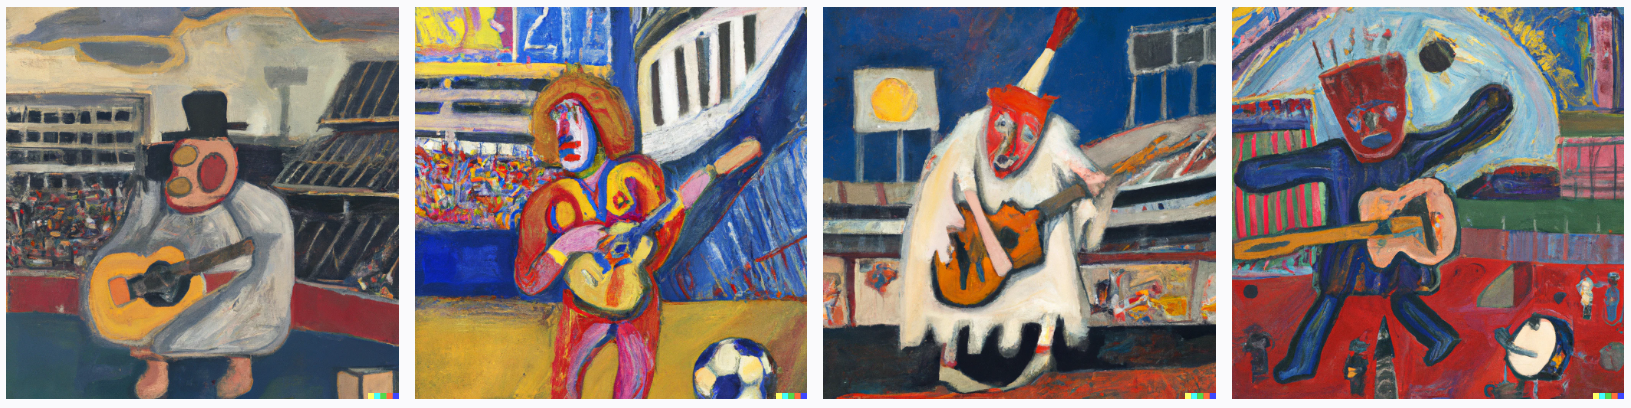 man playing the guitar in front of a stadium wearing a muffin costume expressionism painting 1979